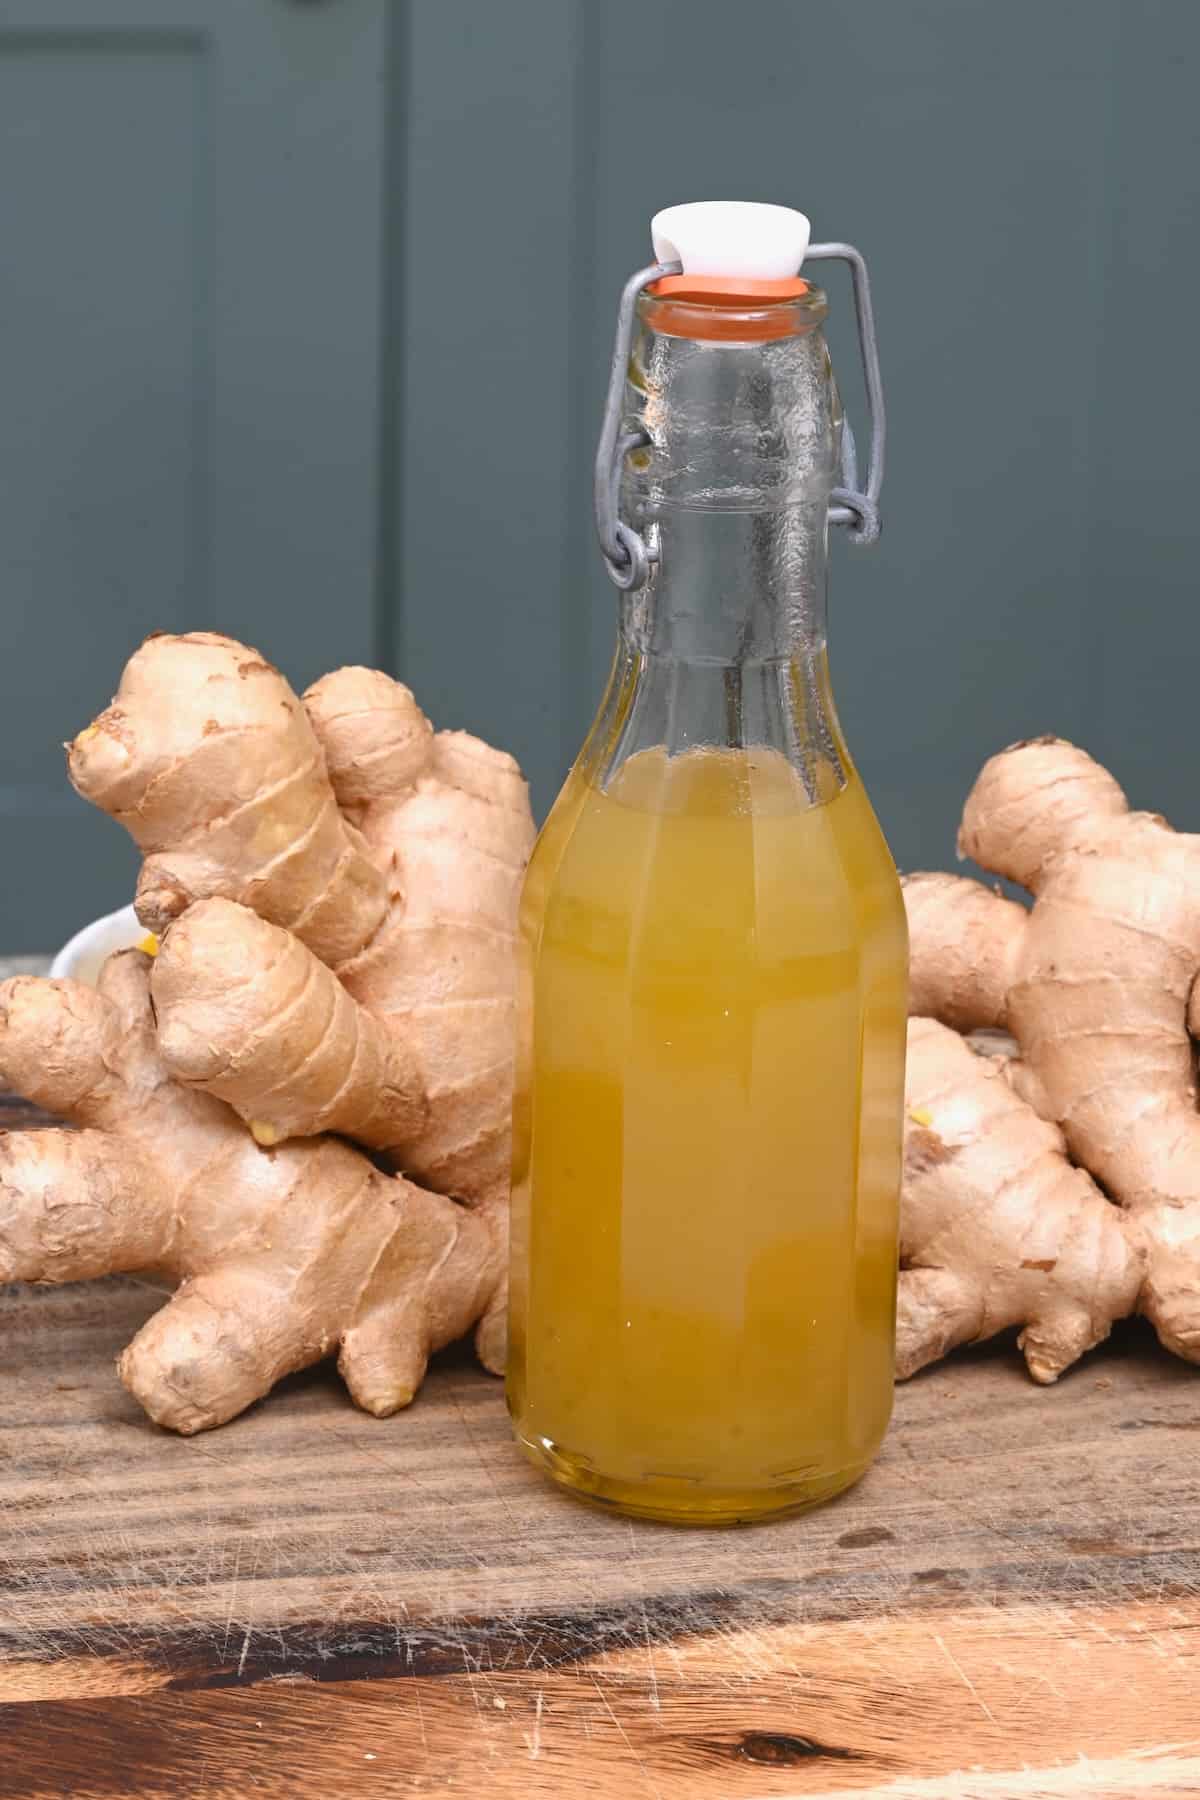 A bottle with homemade ginger simple syrup